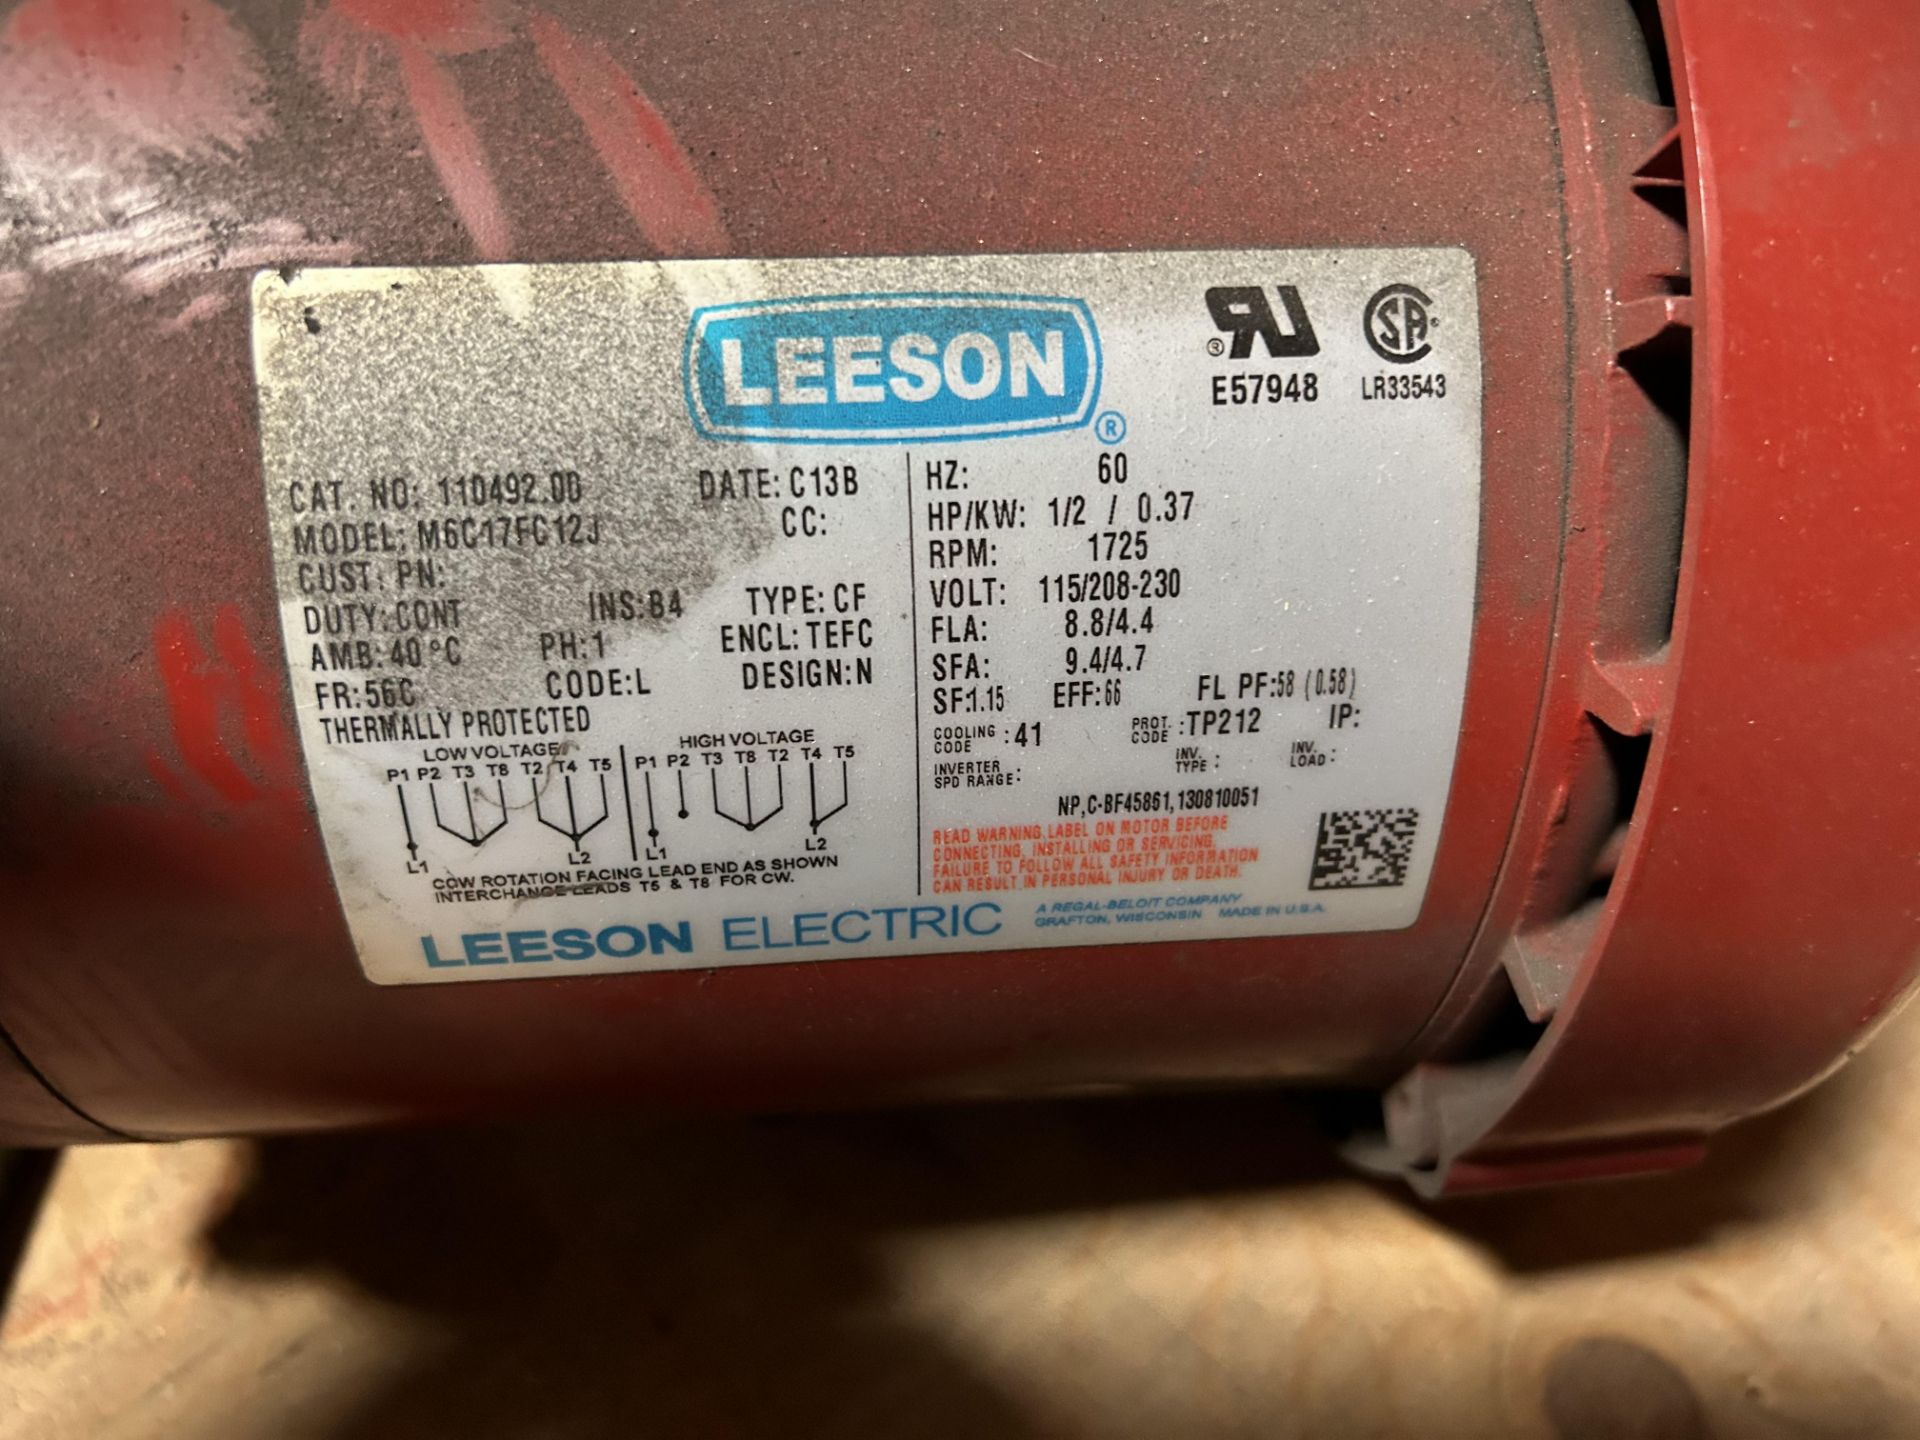 Leeson 1/2 HP Motor with Gear Reducer, Rigging/Loading Fee: $10 - Image 3 of 4